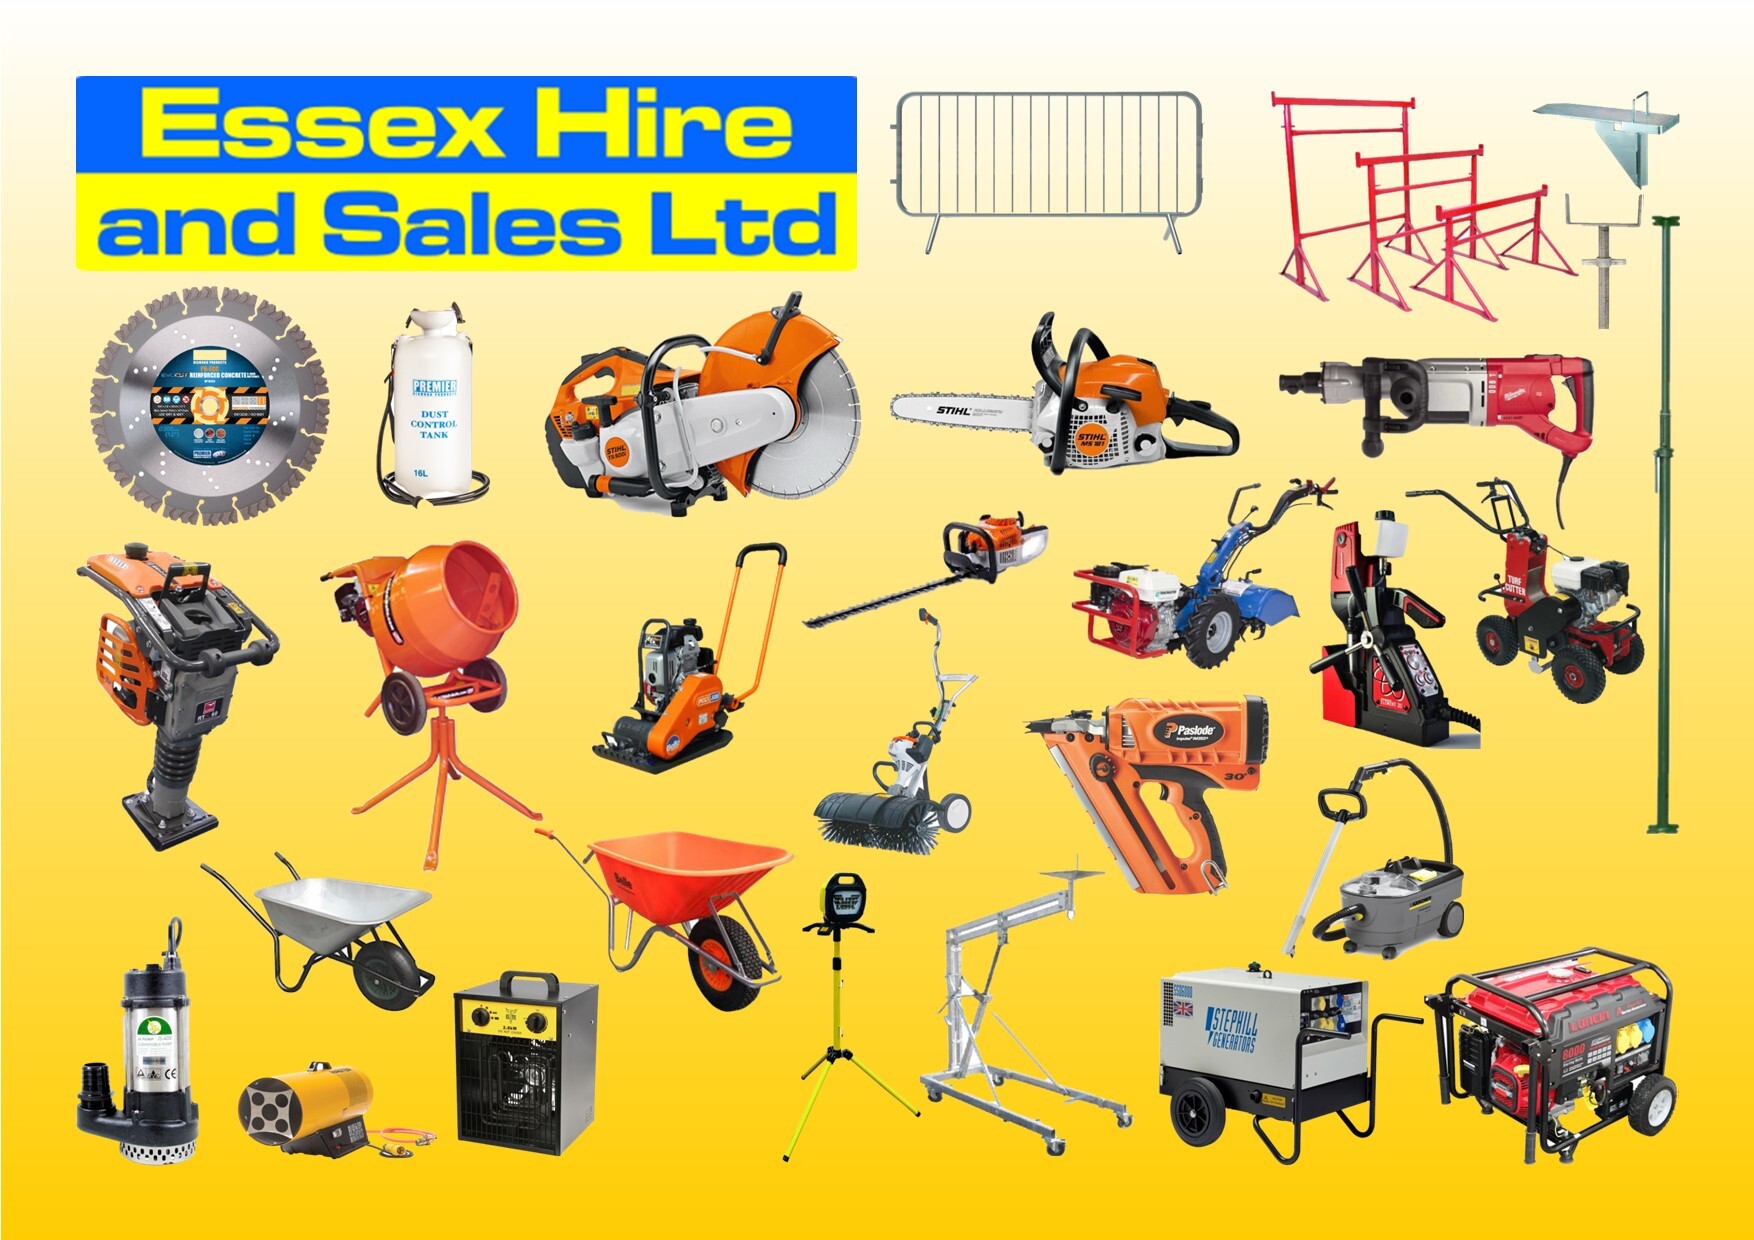 Welcome to Essex Hire & Sales